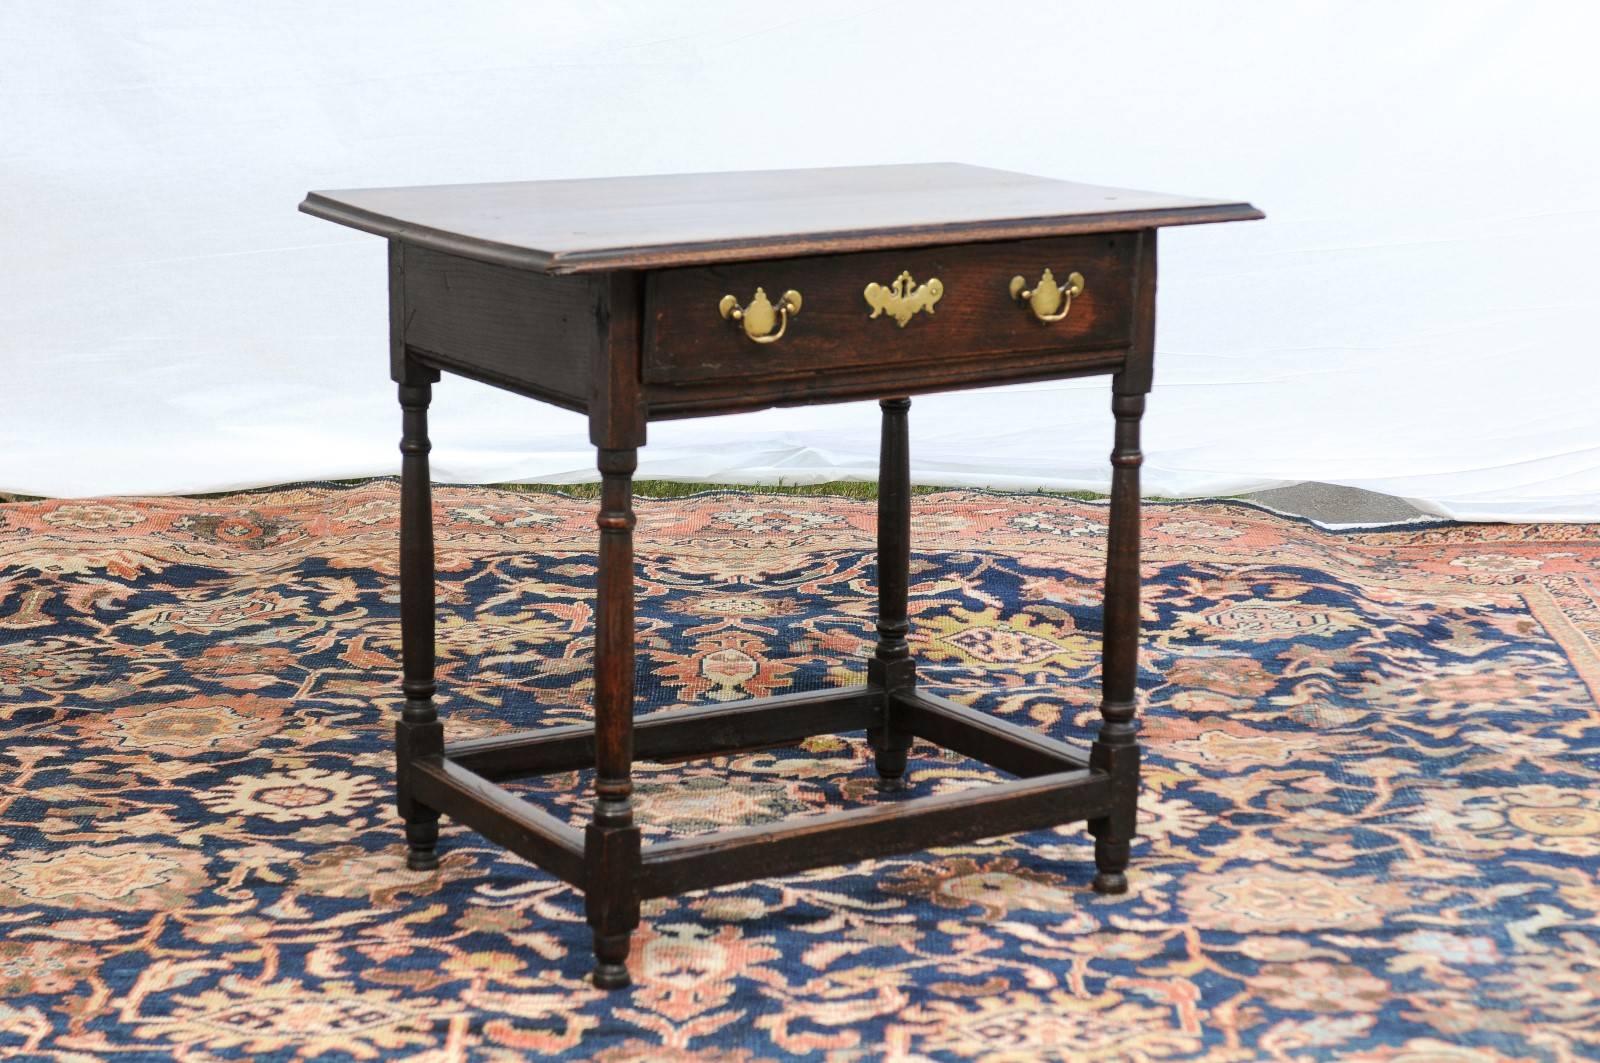 This English oak side table from the late 18th century features a two-plank rectangular top with beveled edge over a single drawer. This drawer is adorned with brass hardware and bail handles. The table is raised on four simple yet elegant Doric